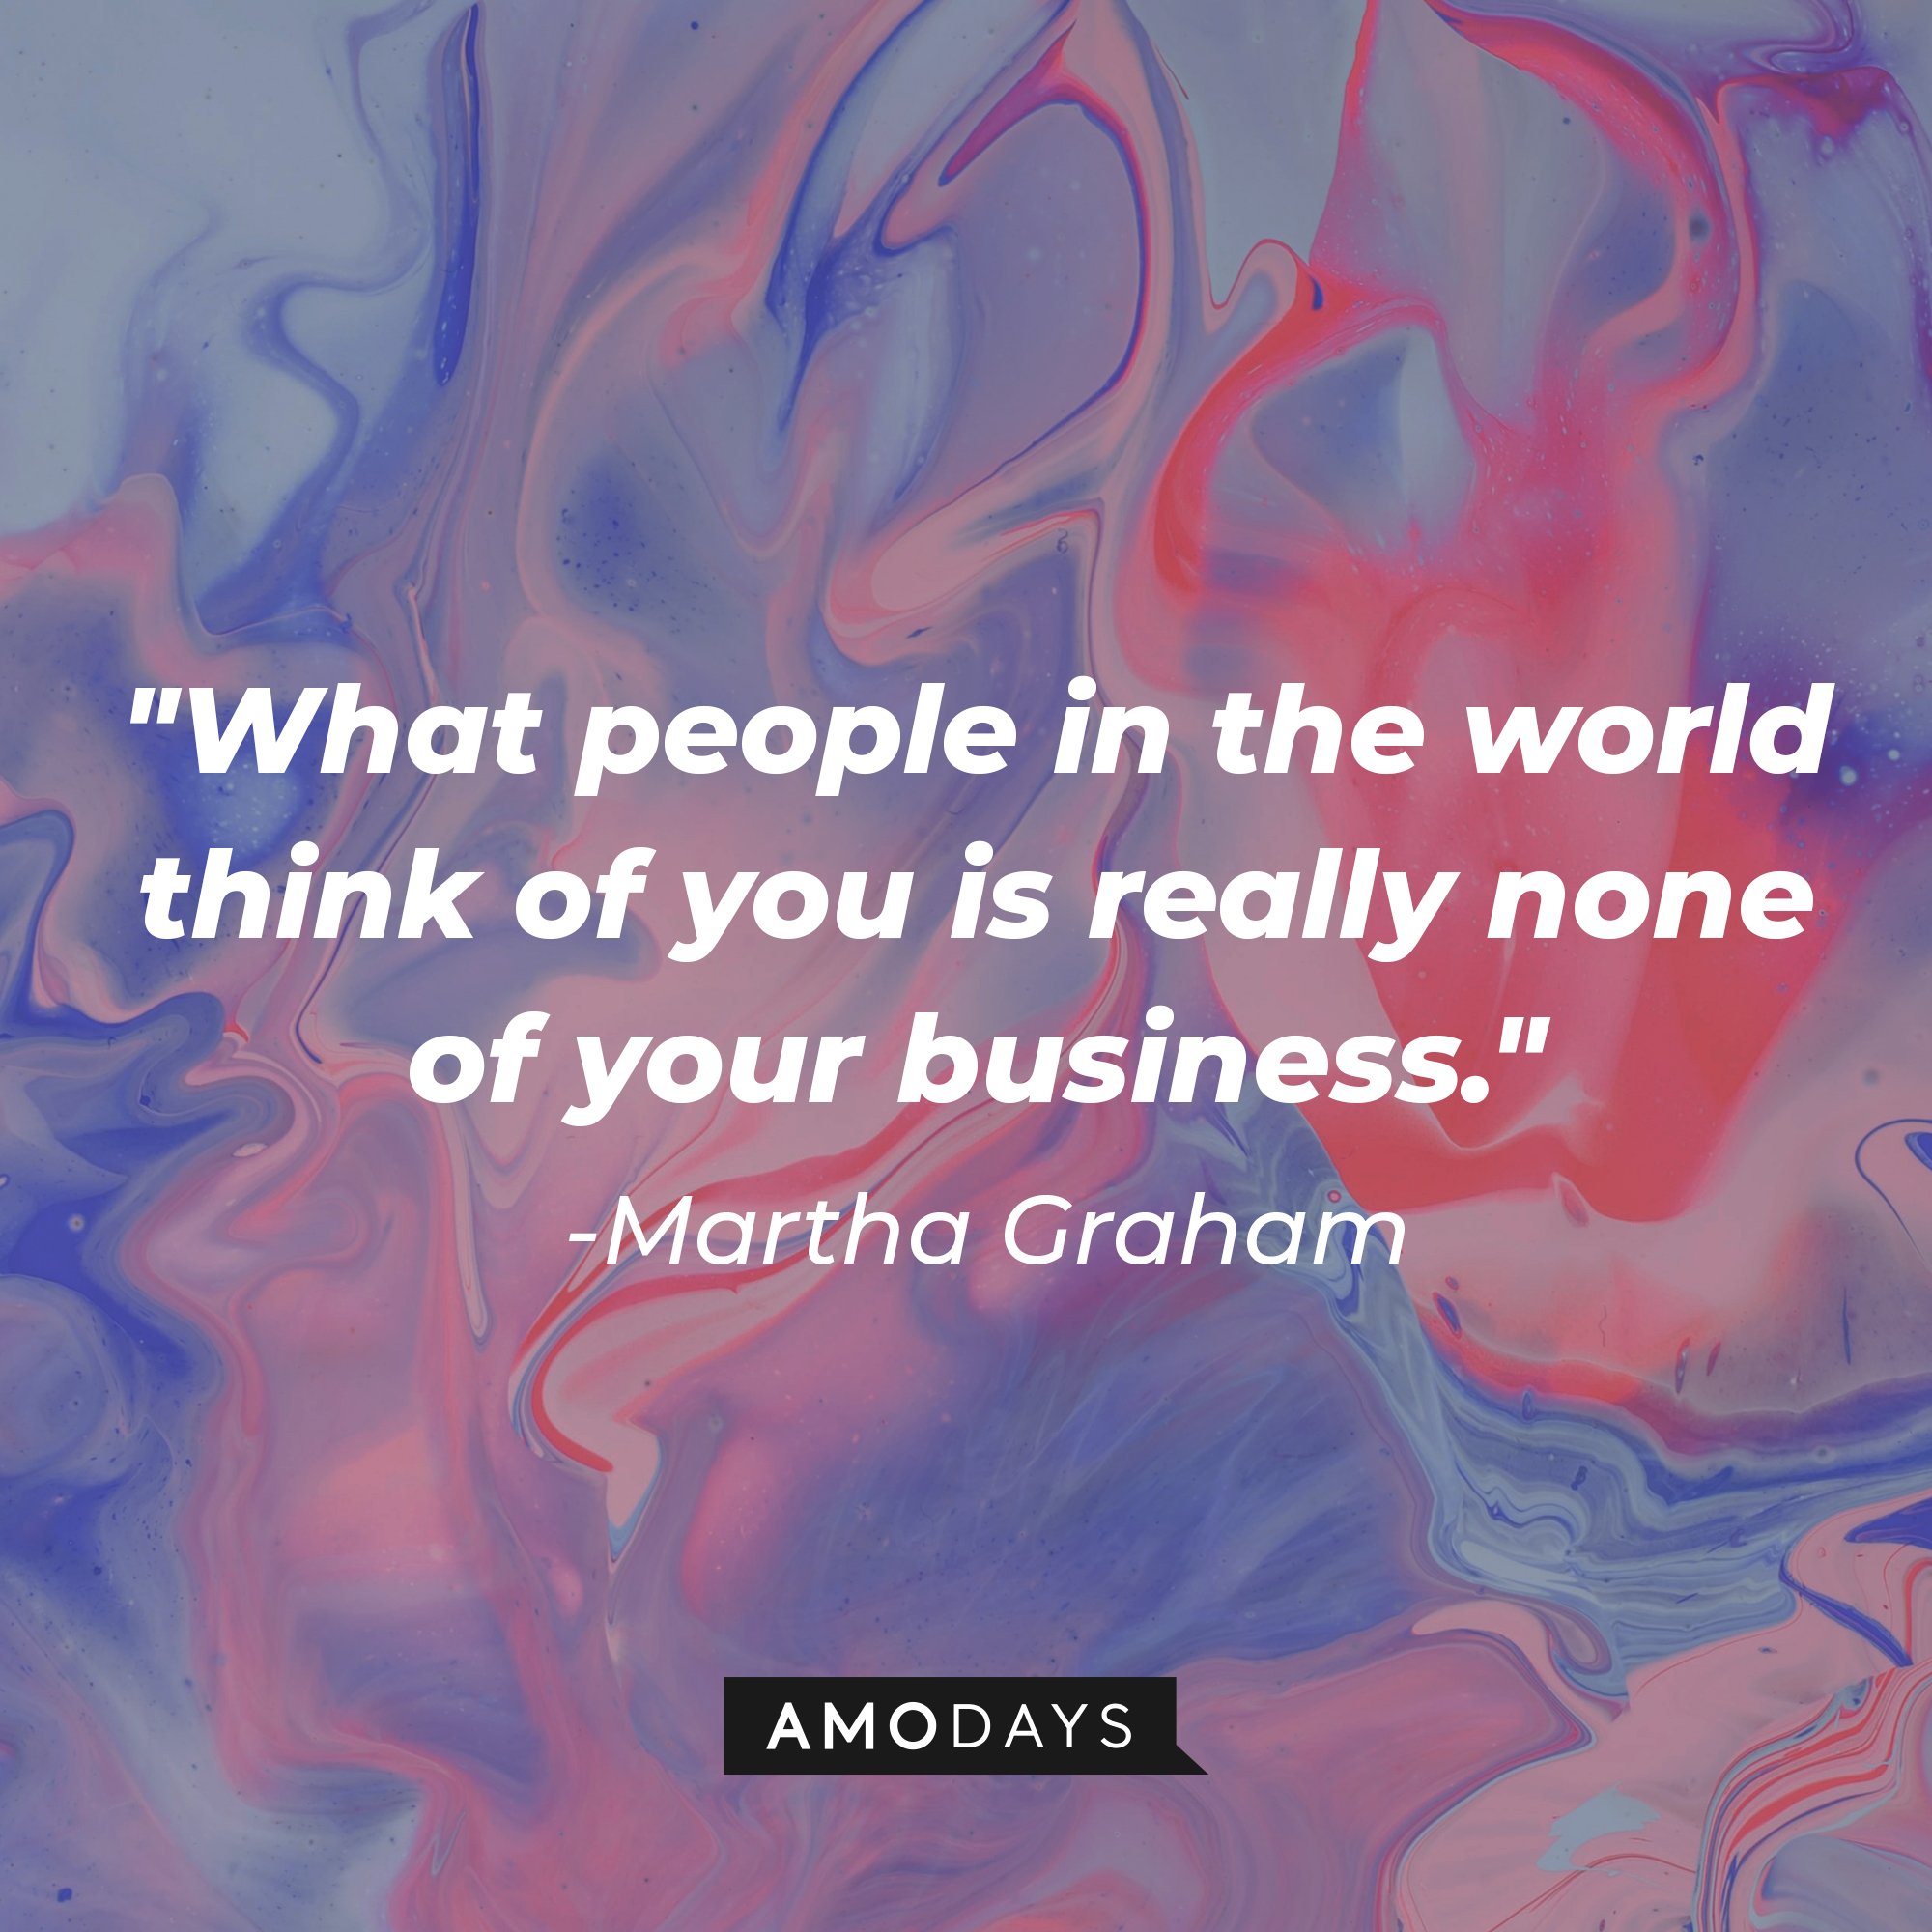  Martha Graham’s quote: "What people in the world think of you is really none of your business." | Image: AmoDays